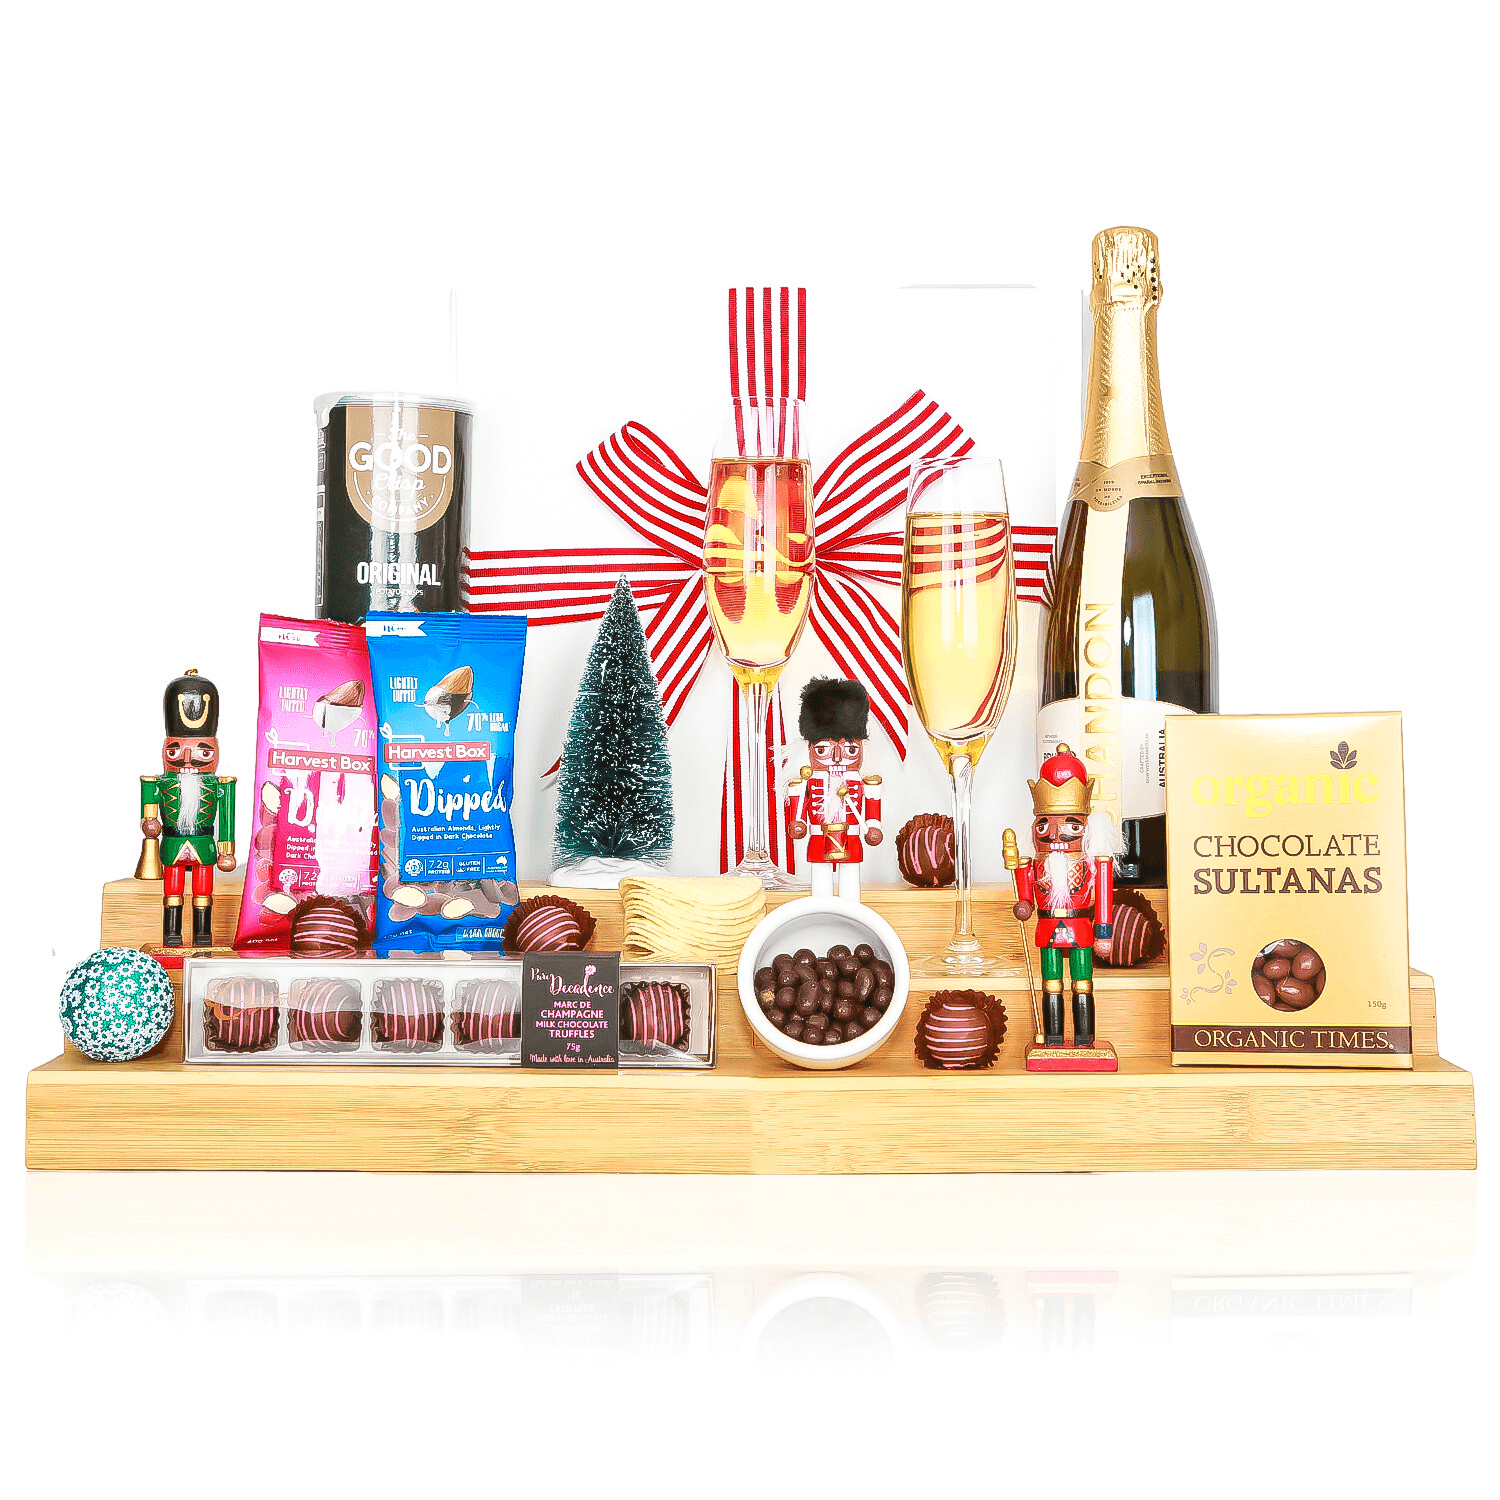 Chocolate & Champagne for Christmas - Healthy Belly Hampers - pure indulgence - birthday hampers - gift hampers - gift hampers melbourne - gift hampers australia - organic hampers -vegan hampers - gluten free hampers - birthday hampers -anniversary hampers - wedding hampers - alcohol hampers